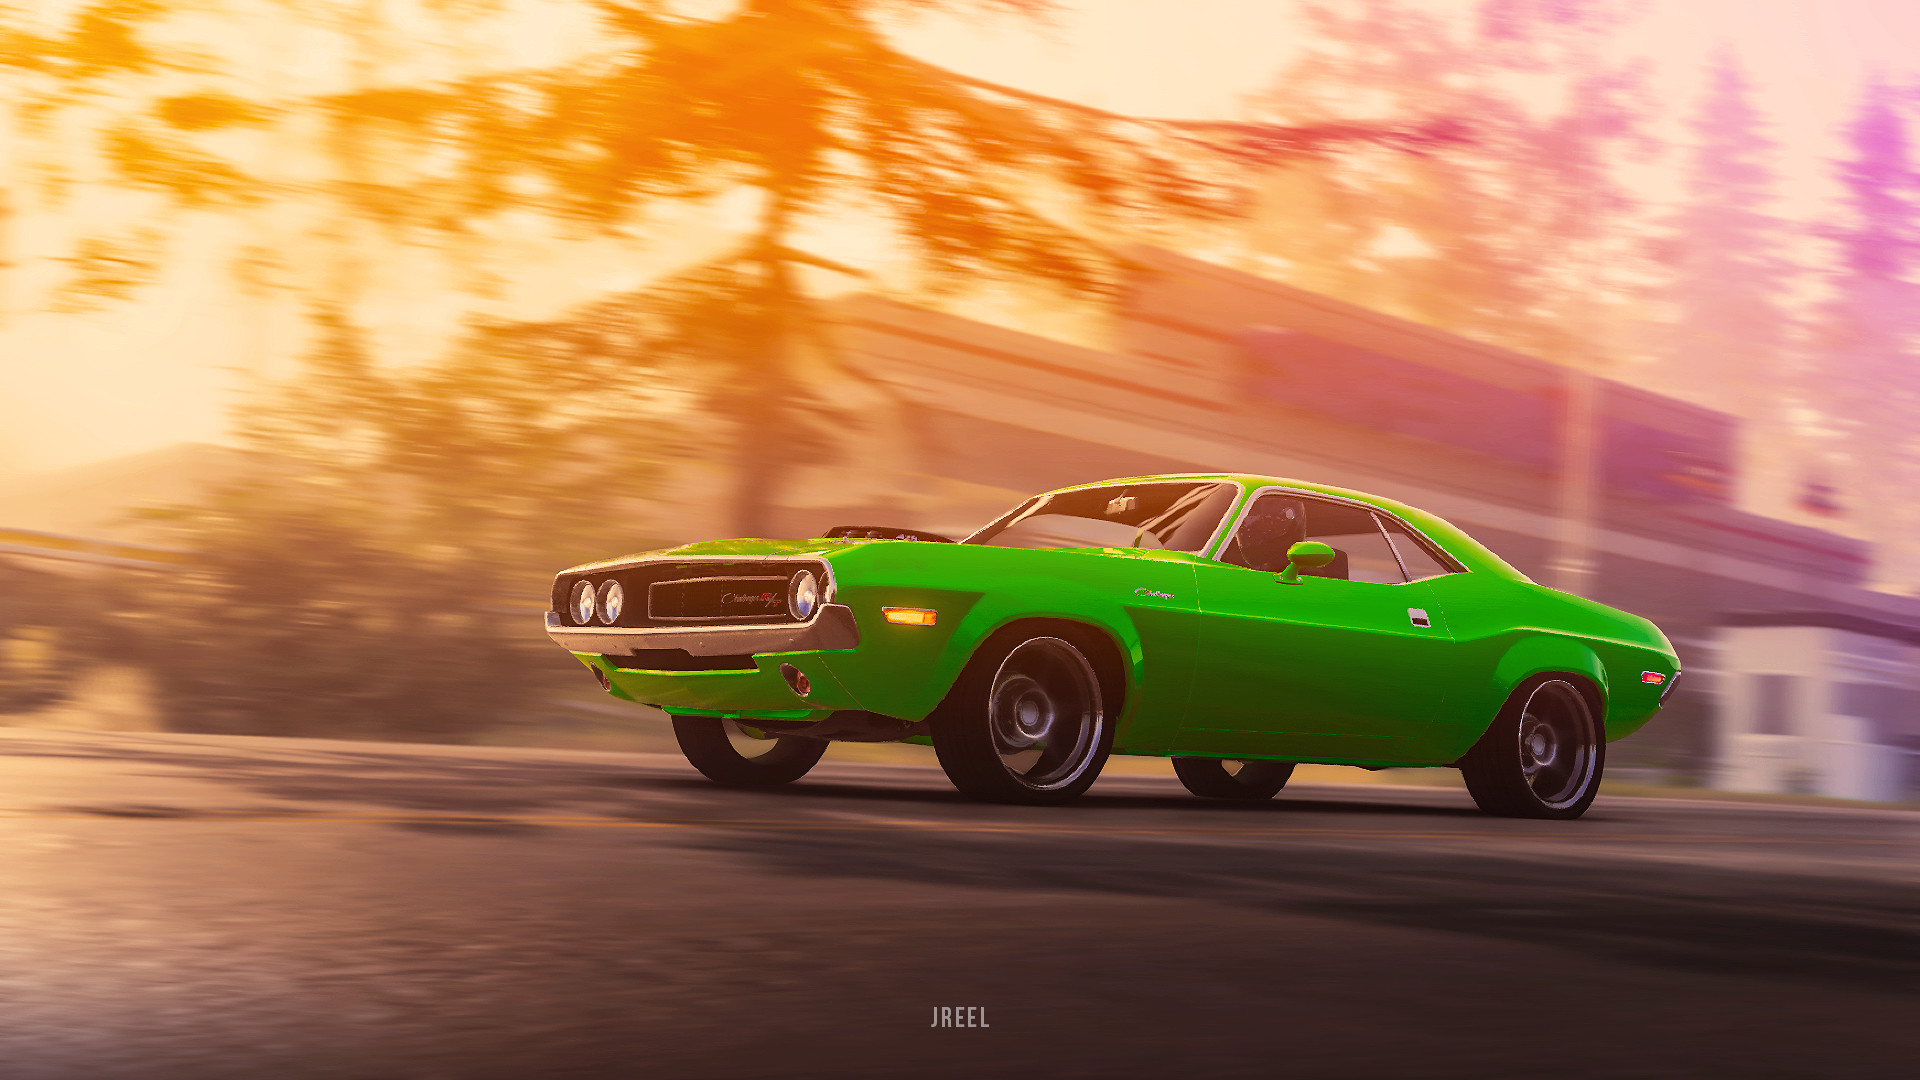 video game, the crew 2, dodge challenger, dodge, green car